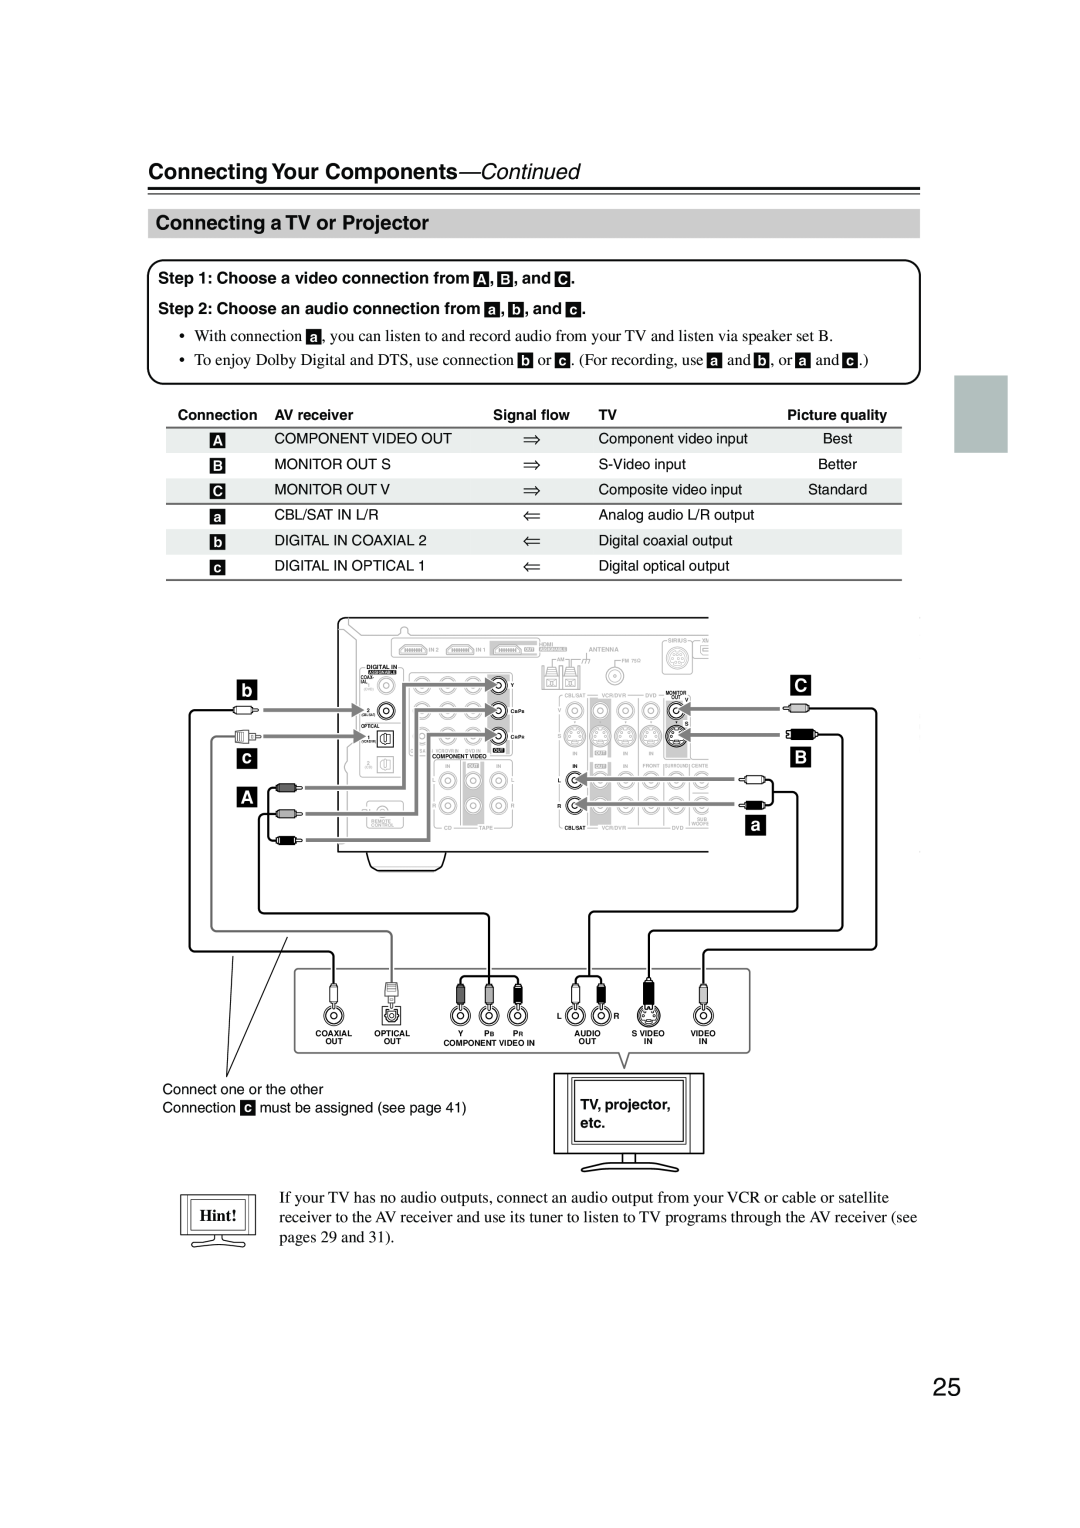 Onkyo HT-SP904 instruction manual Connecting a TV or Projector, b c A, Connecting Your Components—Continued, Hint 